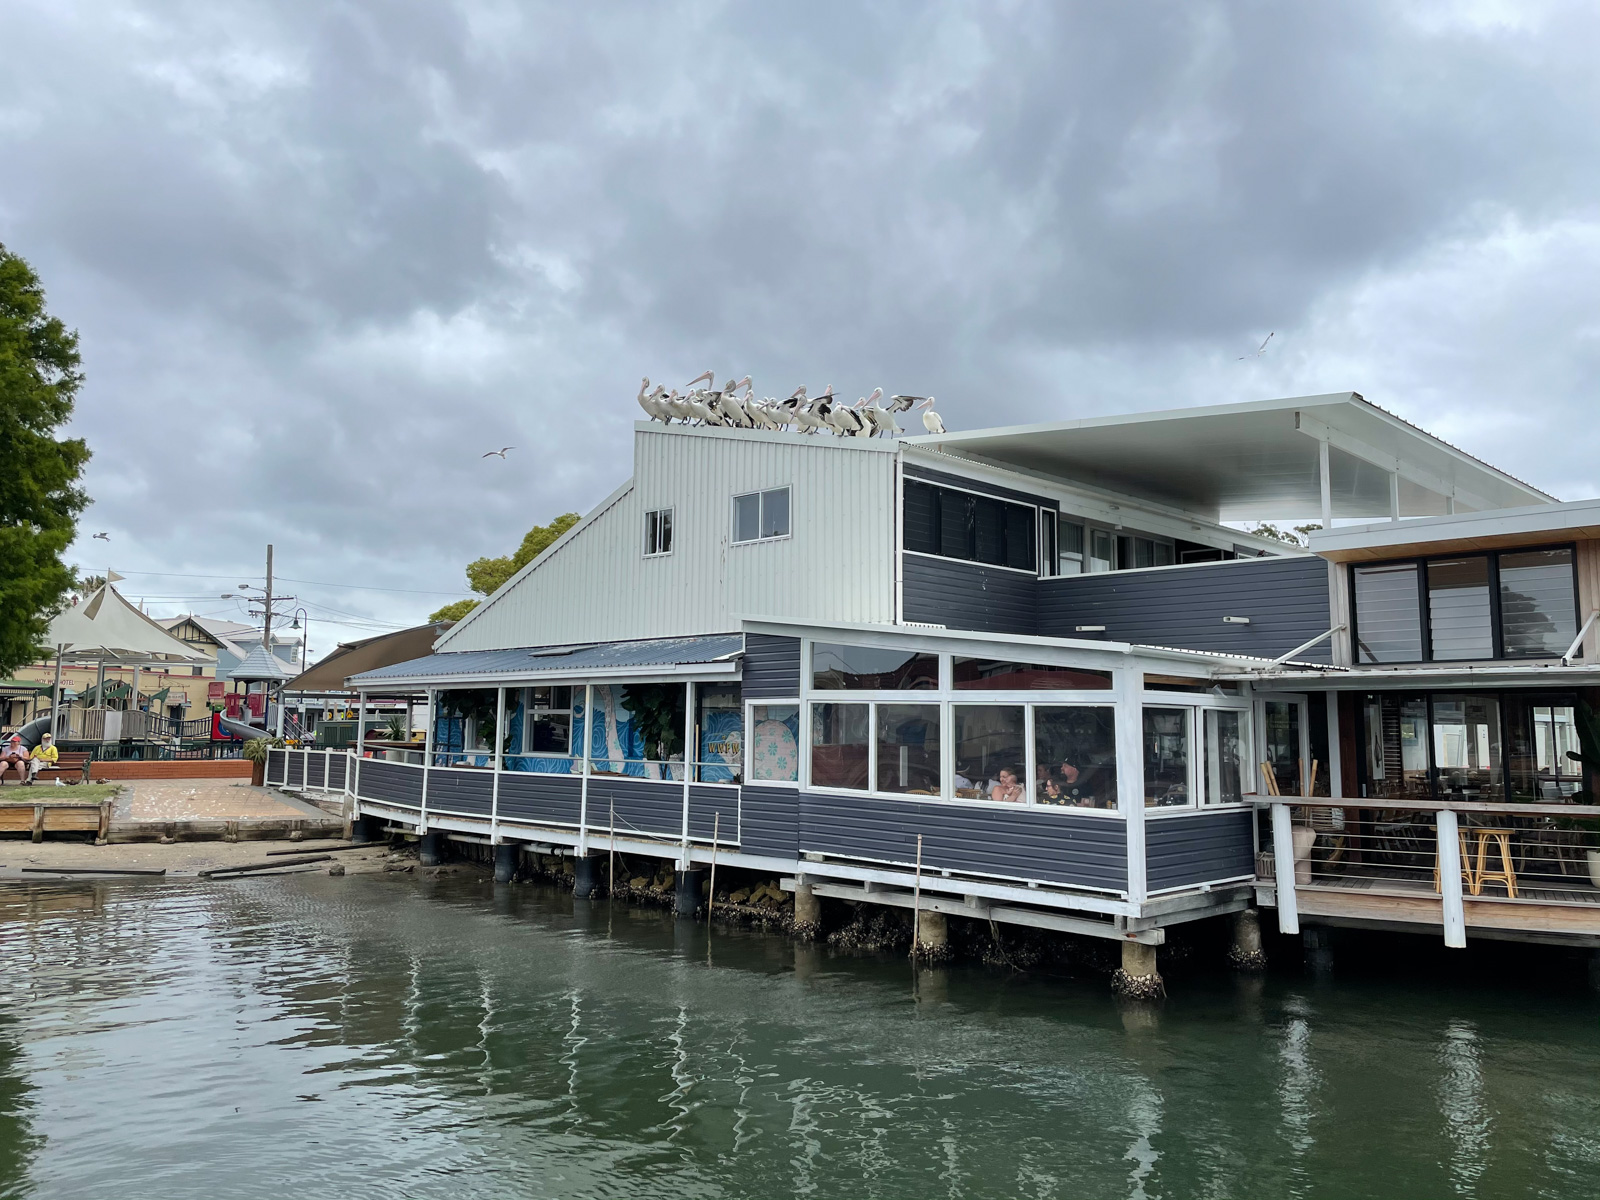 A fish and chip shop on the water, with many pelicans perched on the roof. The sky is grey and cloudy.